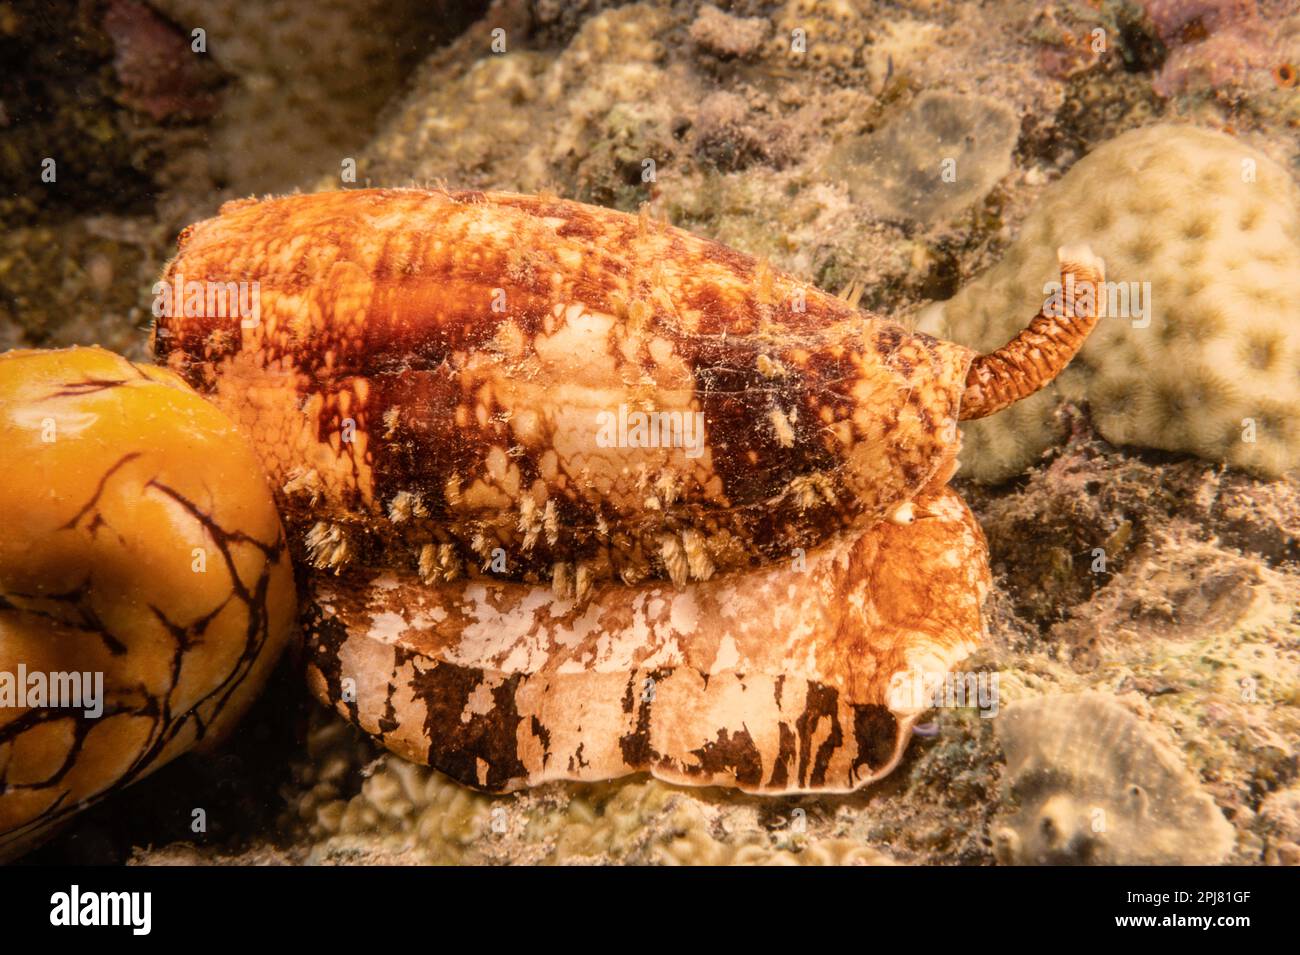 This geographic cone snail, Conus geographus, was photographed hunting on a reef at night, Indonesia. Stock Photo